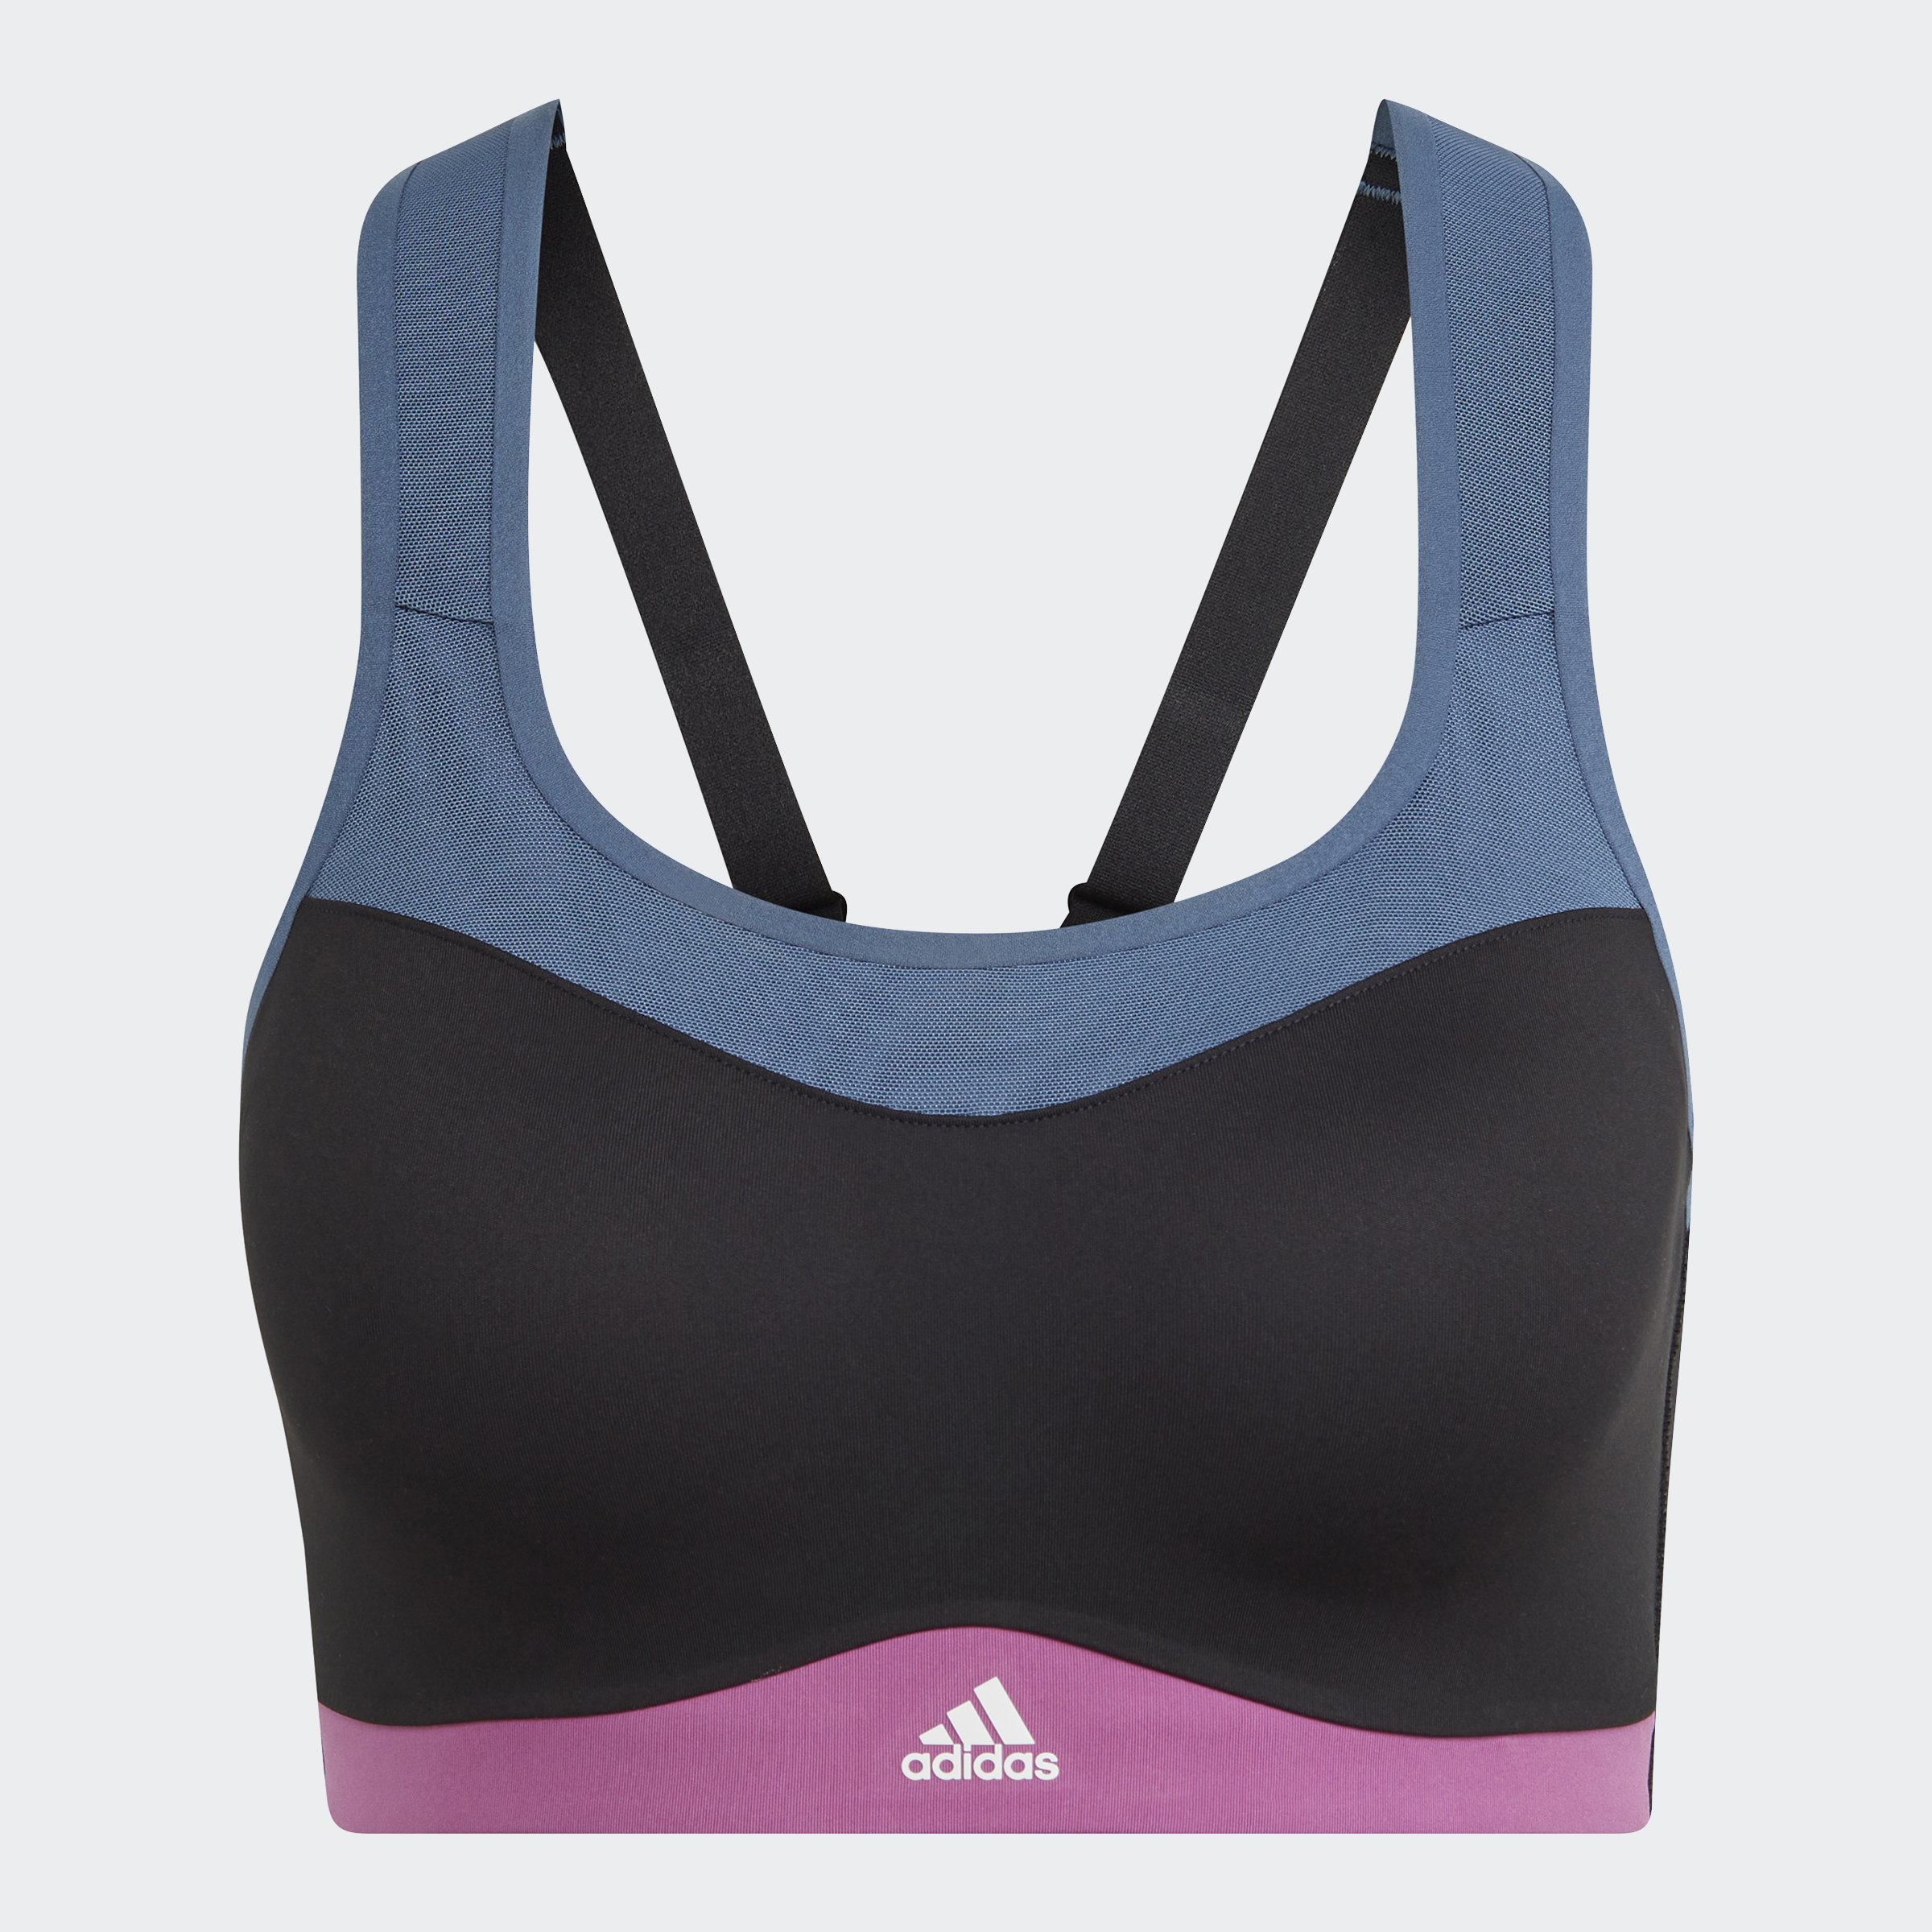 adidas TLRD Impact Training High-Support Sports Bra Women - Cup size A-C -  black/white HF2297